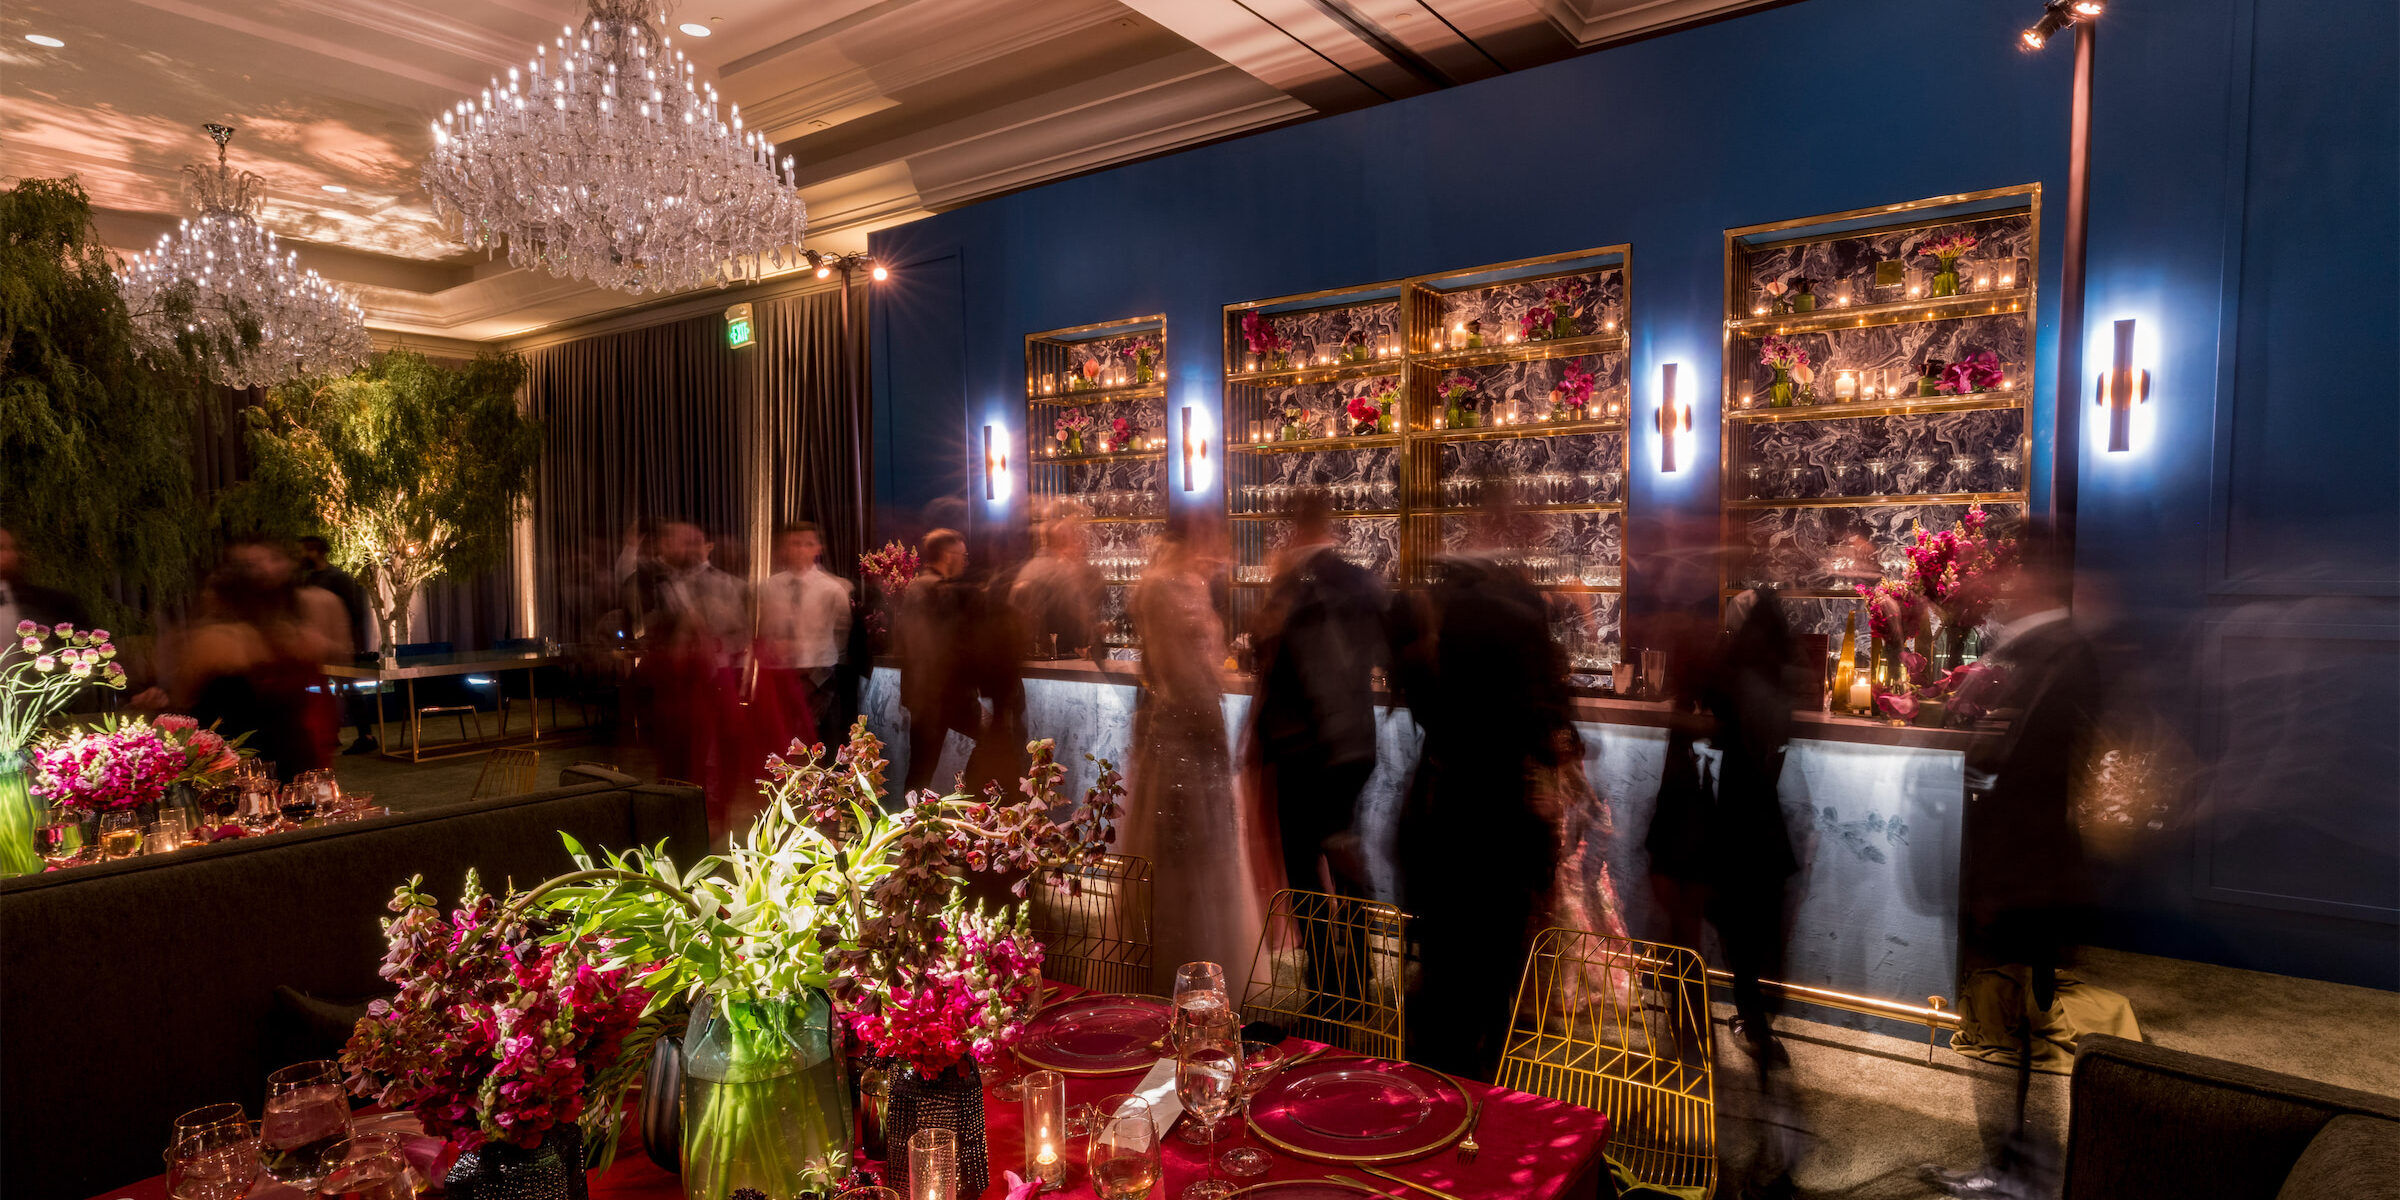 Guests converse around a custom-built bar at a glam enchanted wedding reception in the ballroom of the Four Seasons Hotel Westlake Village.